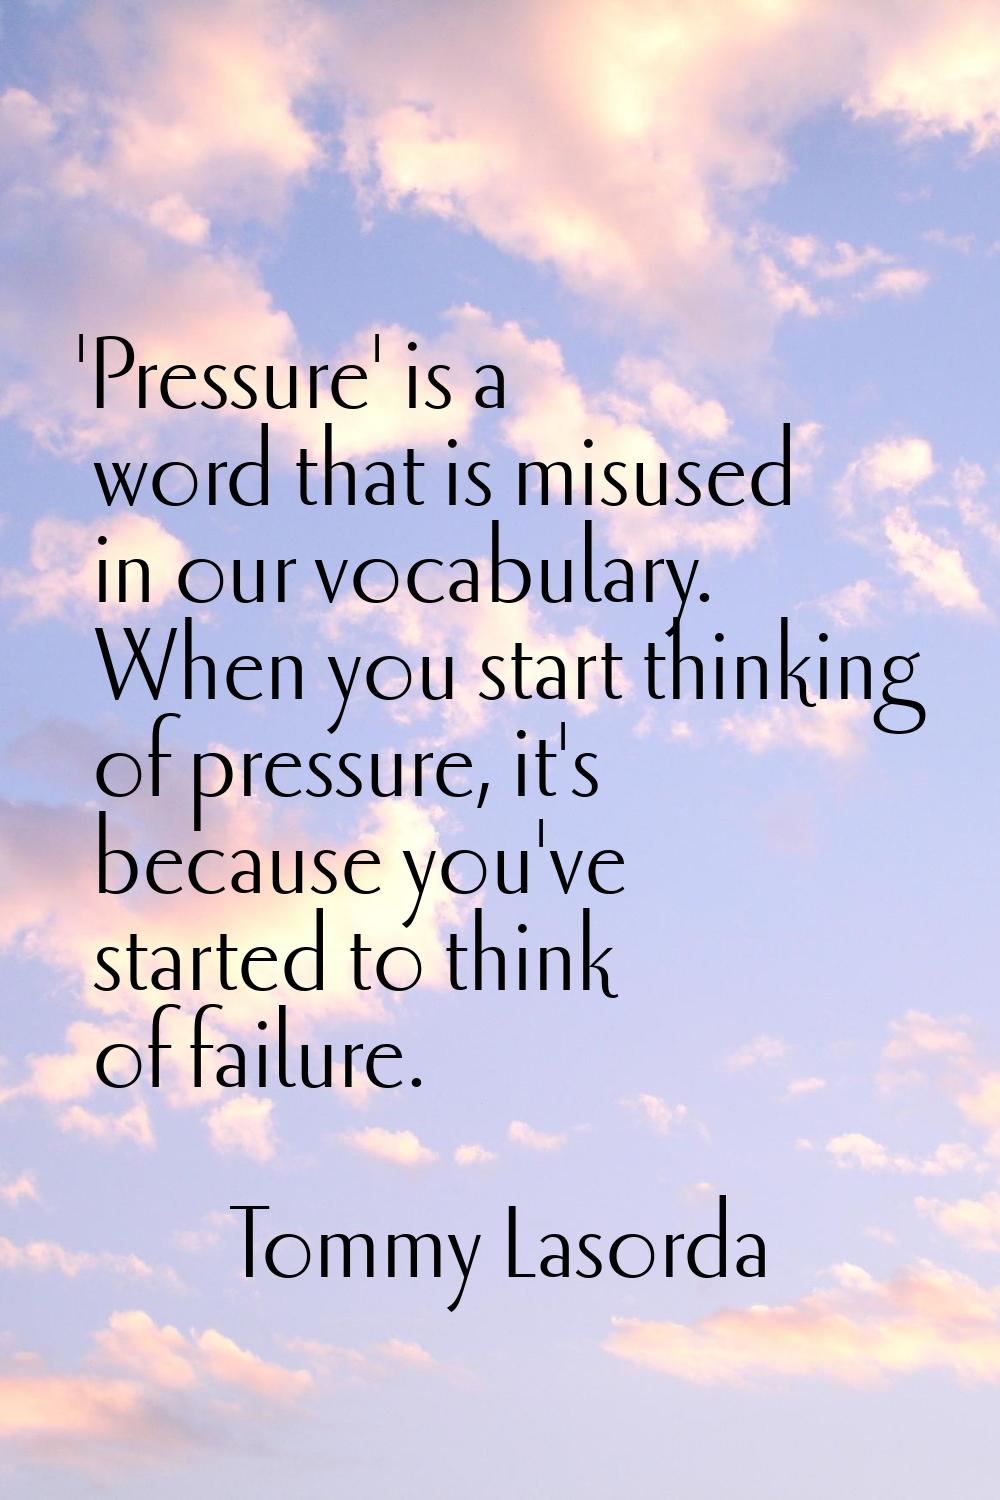 'Pressure' is a word that is misused in our vocabulary. When you start thinking of pressure, it's b